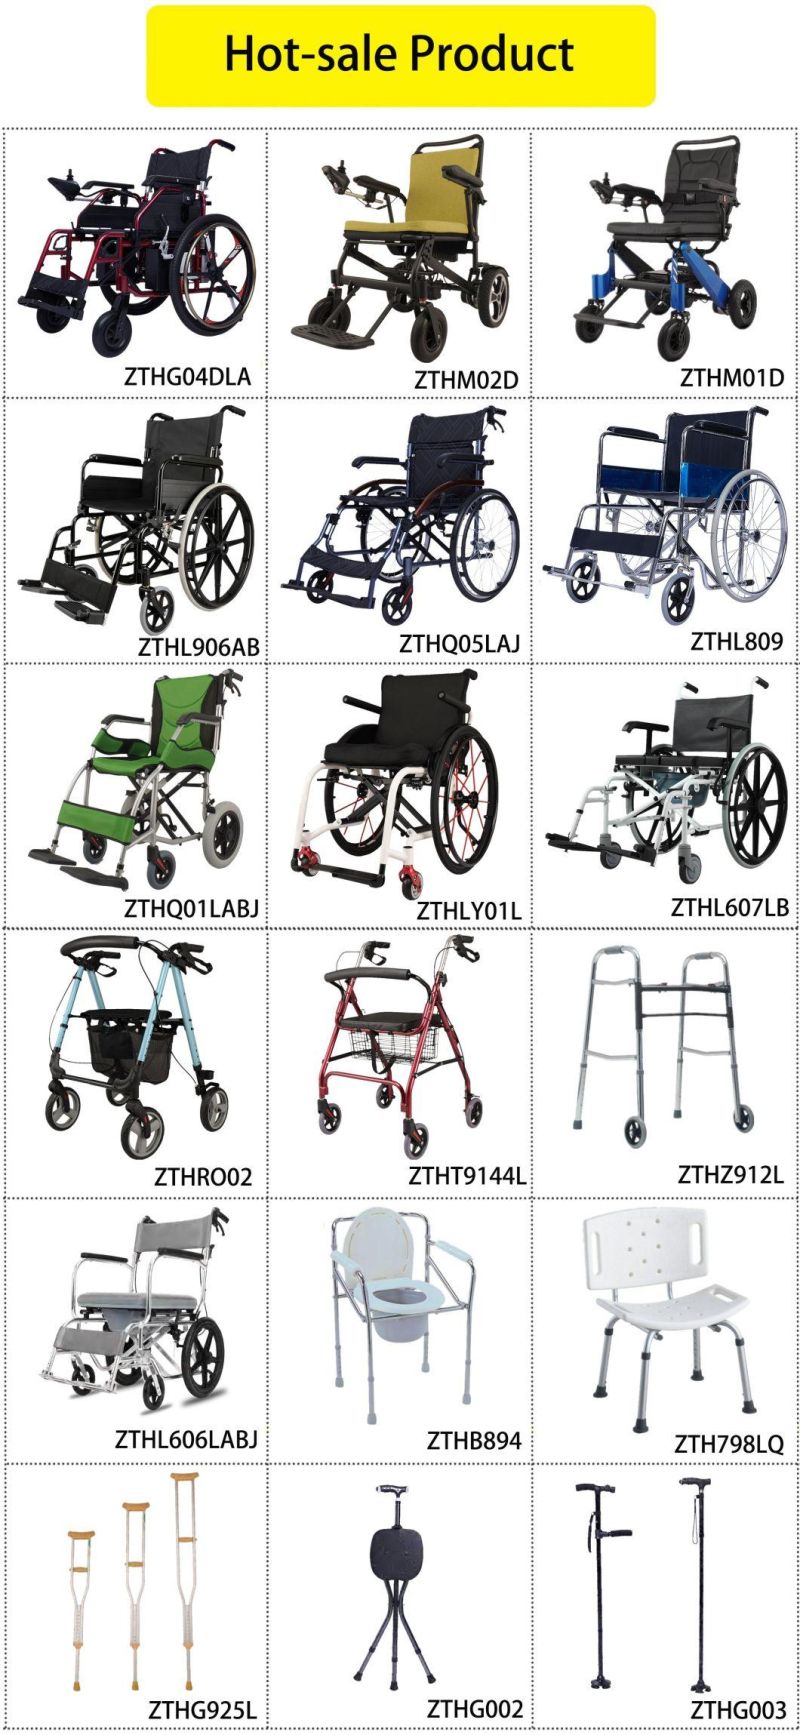 Home Care with Wheel Height Adjust Lightweight Safety Toilet Seat Elderly/Disable Patient People Rehabilitation Products Steel Nursing Commode Chair